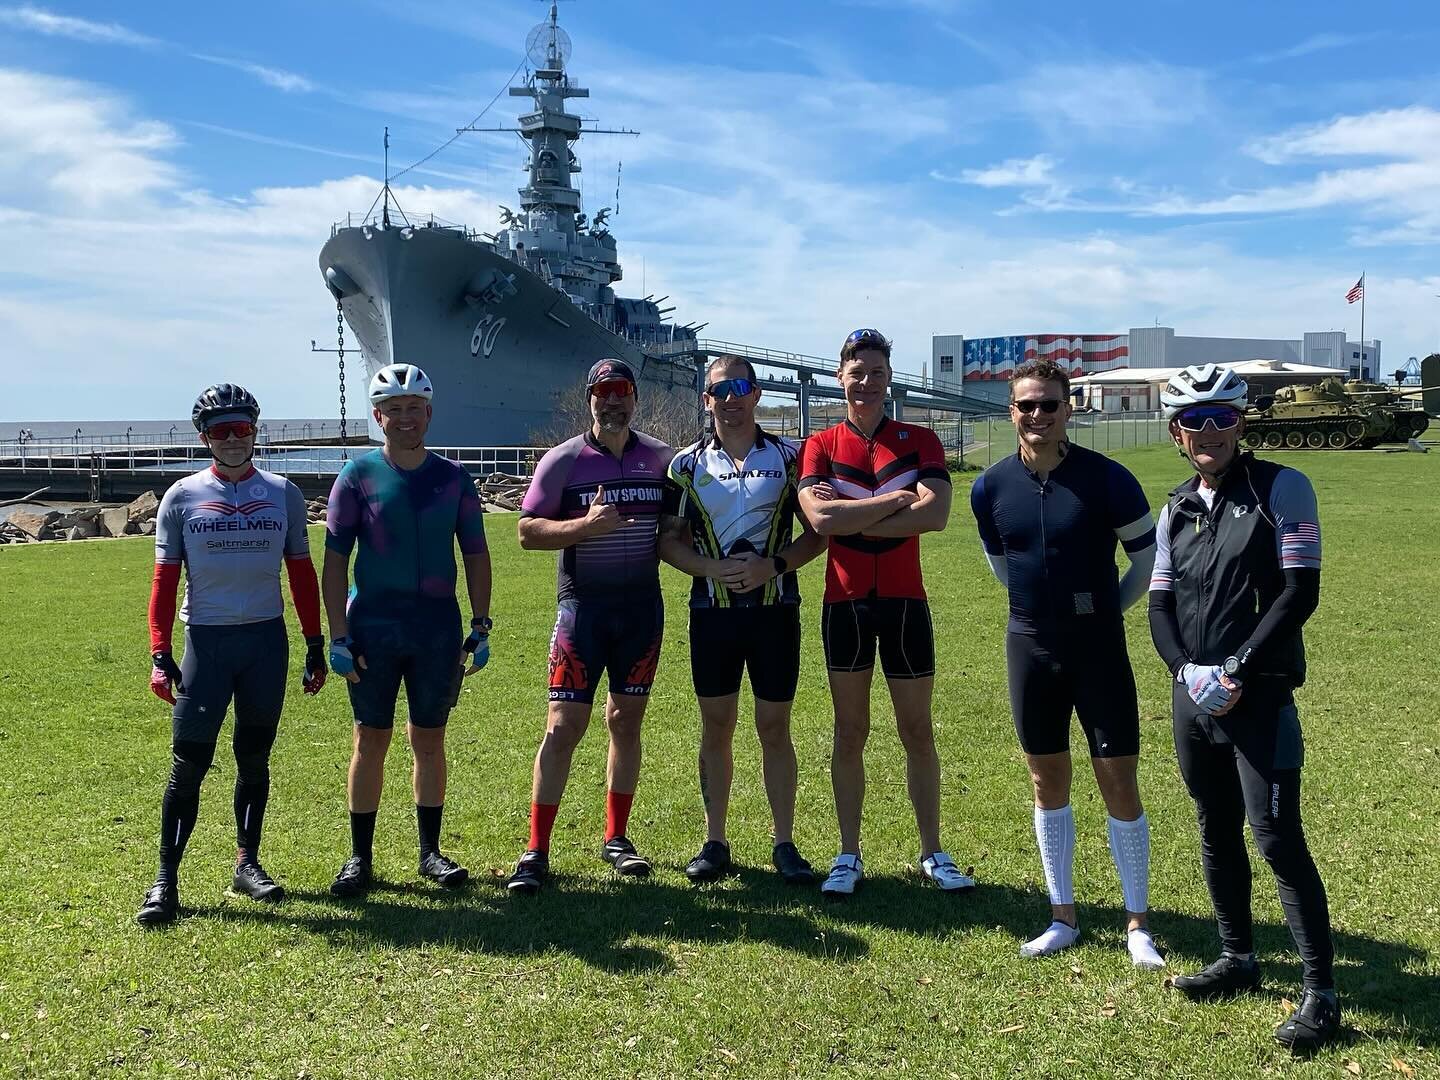 @westfloridawheelmen and friends at the @theussalabama Battleship Ride!

March Century!
For some, it&rsquo;s a first. For others, it&rsquo;s an awesome day for a #repeat!

@trulyspokin @ameriprise #reynoldsrealestate  @mikehoe70 @subway @key.sailing 